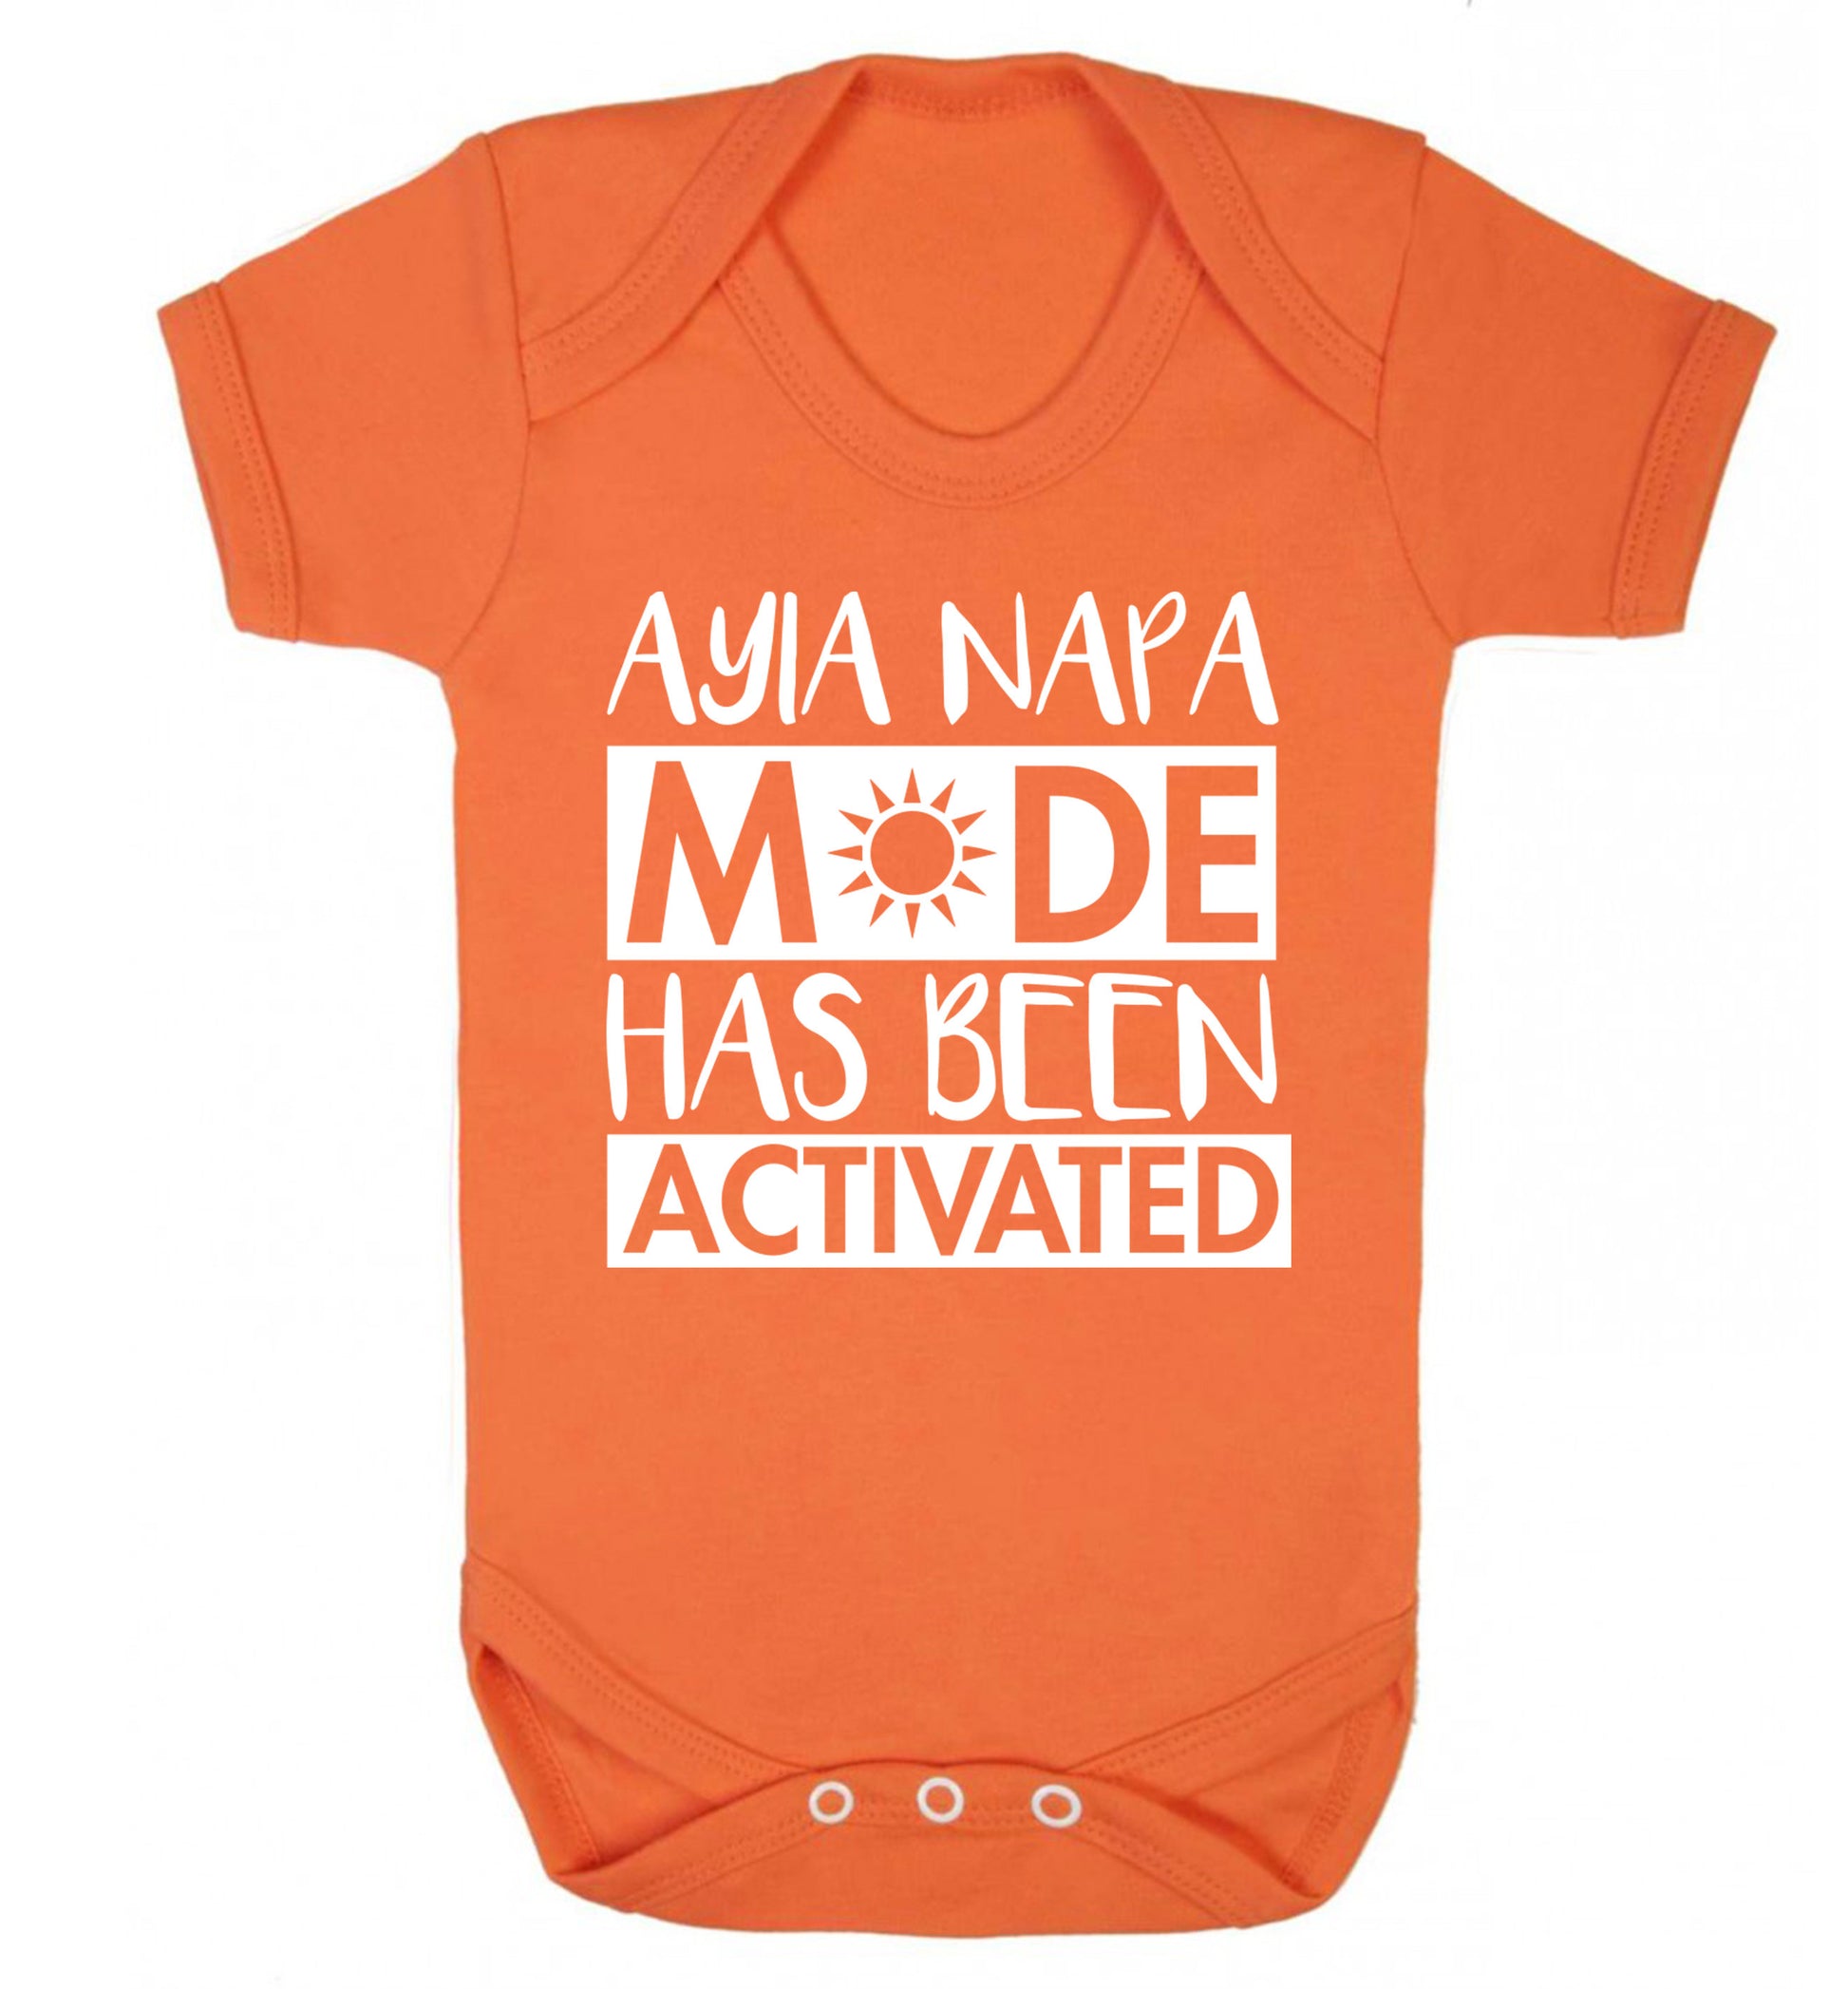 Aiya Napa mode has been activated Baby Vest orange 18-24 months